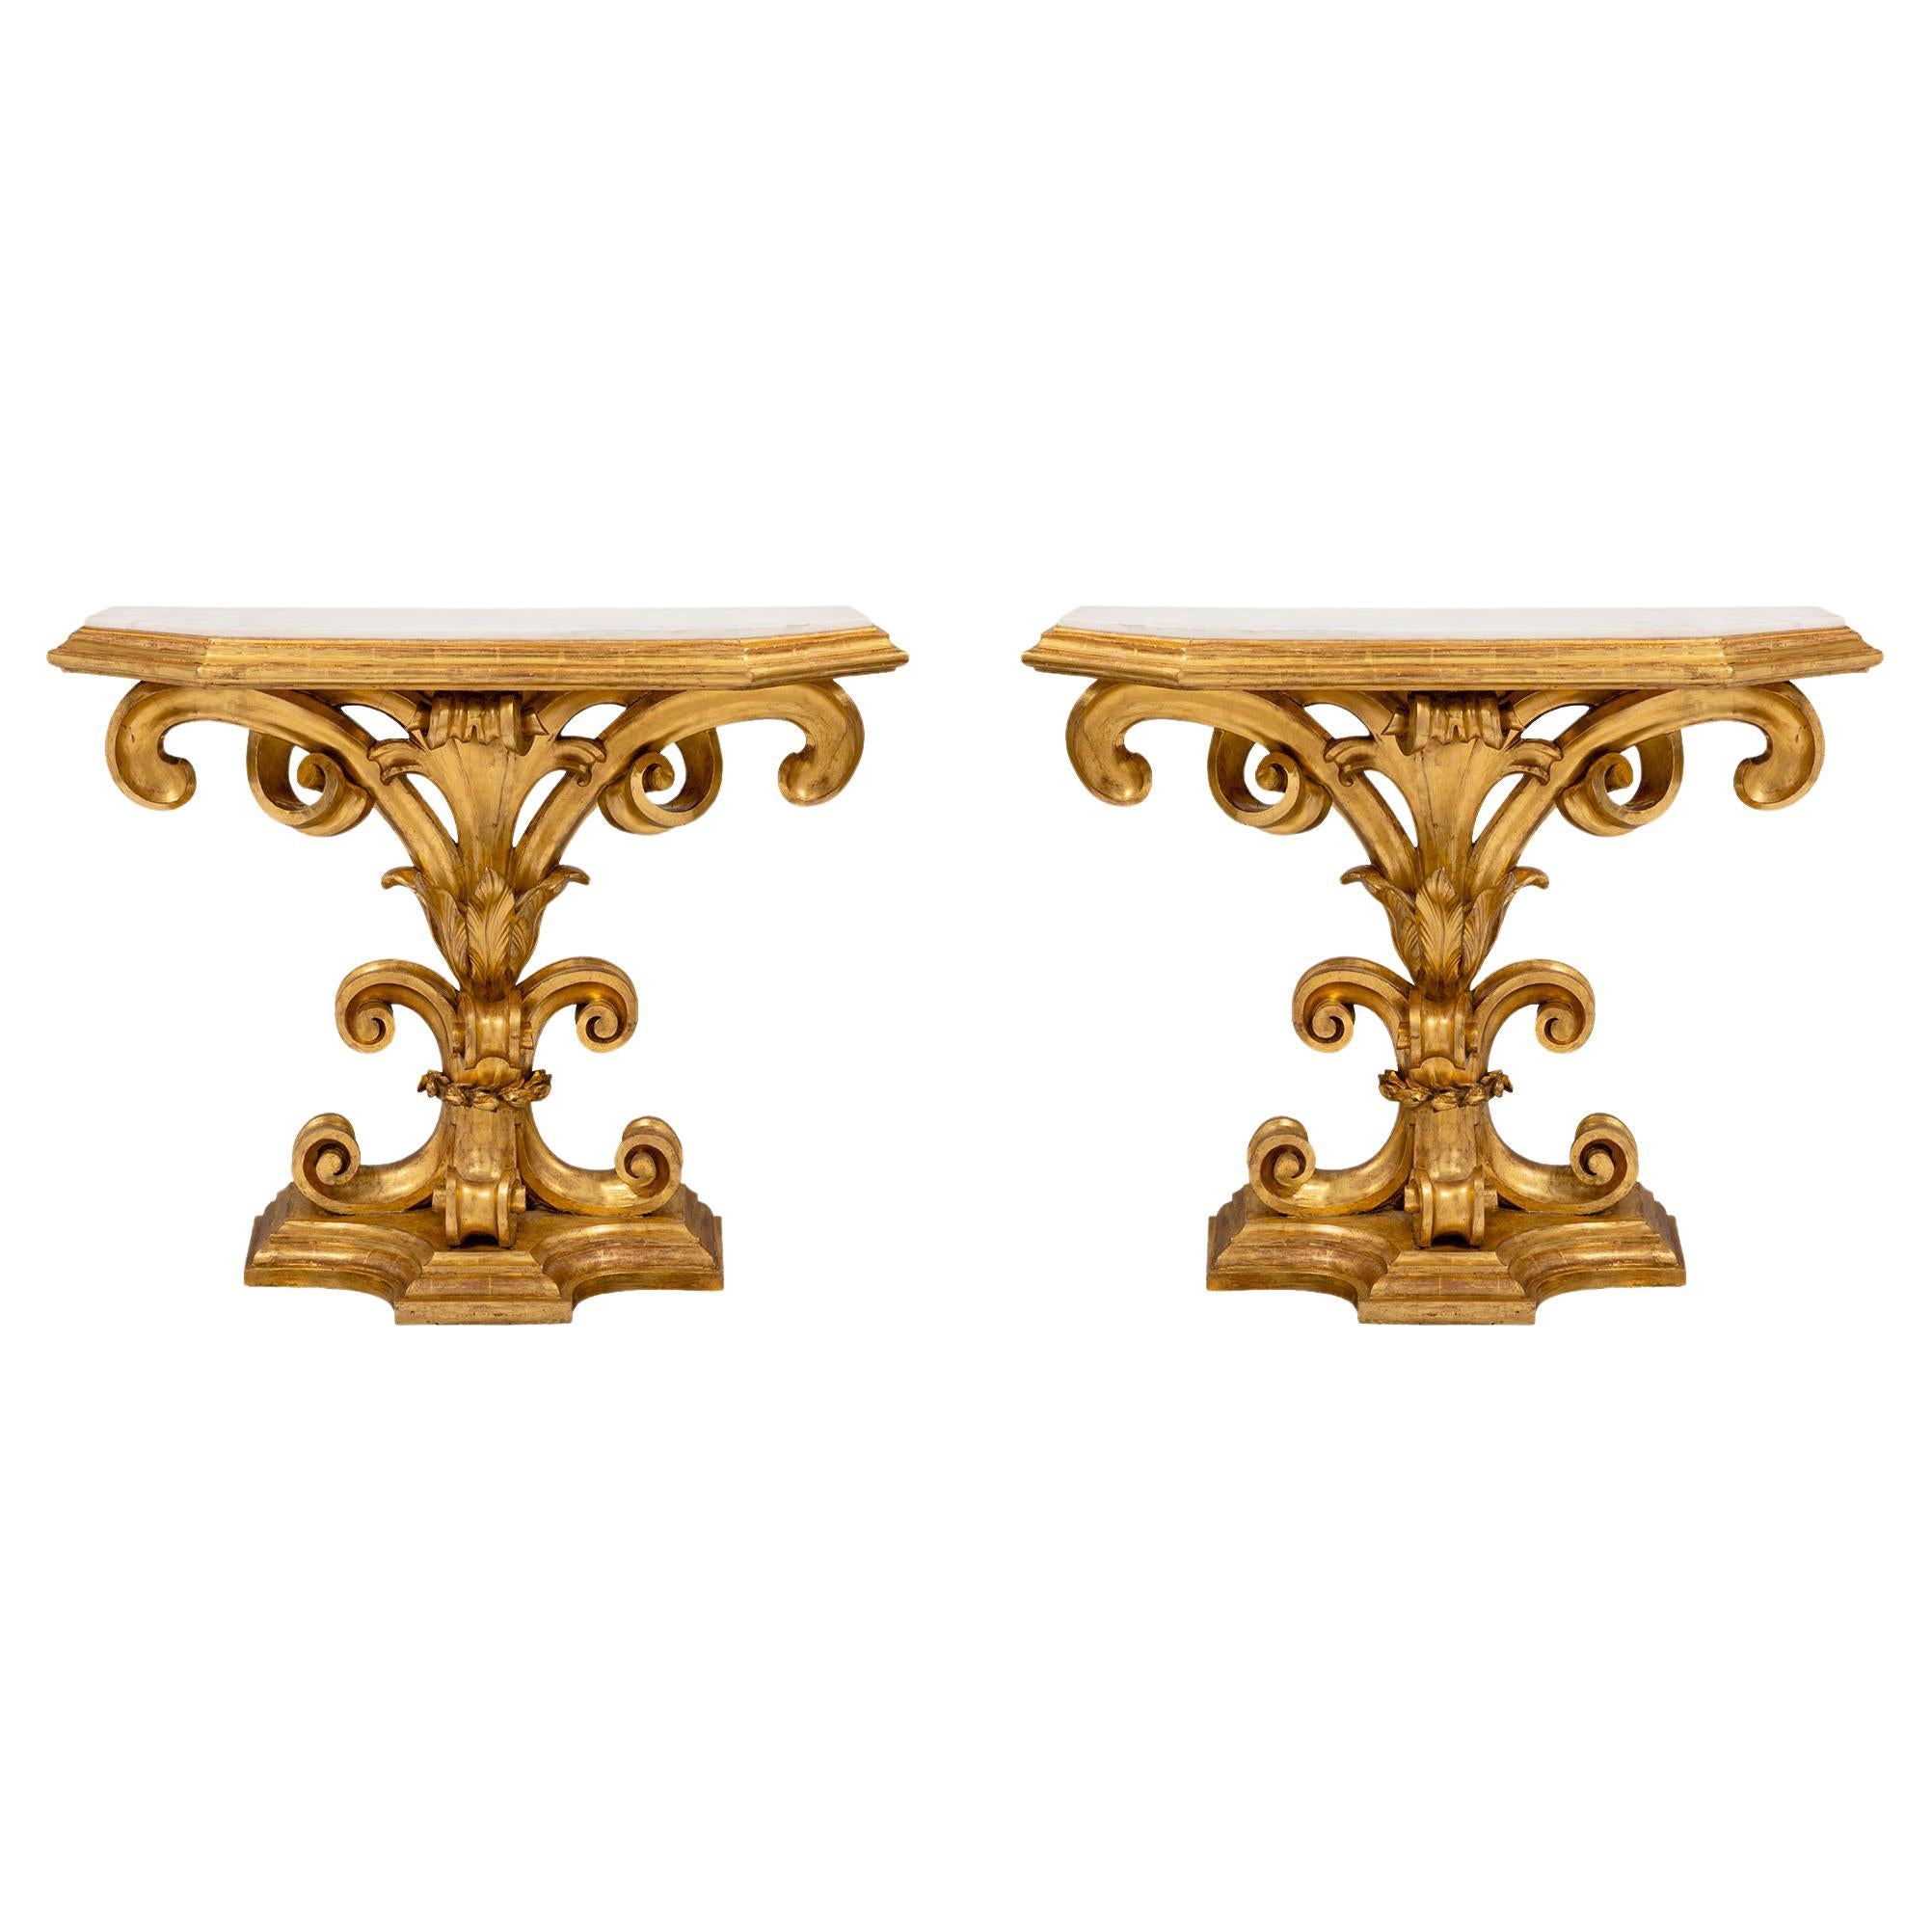 Pair of Italian Early 19th Century Baroque Giltwood Consoles